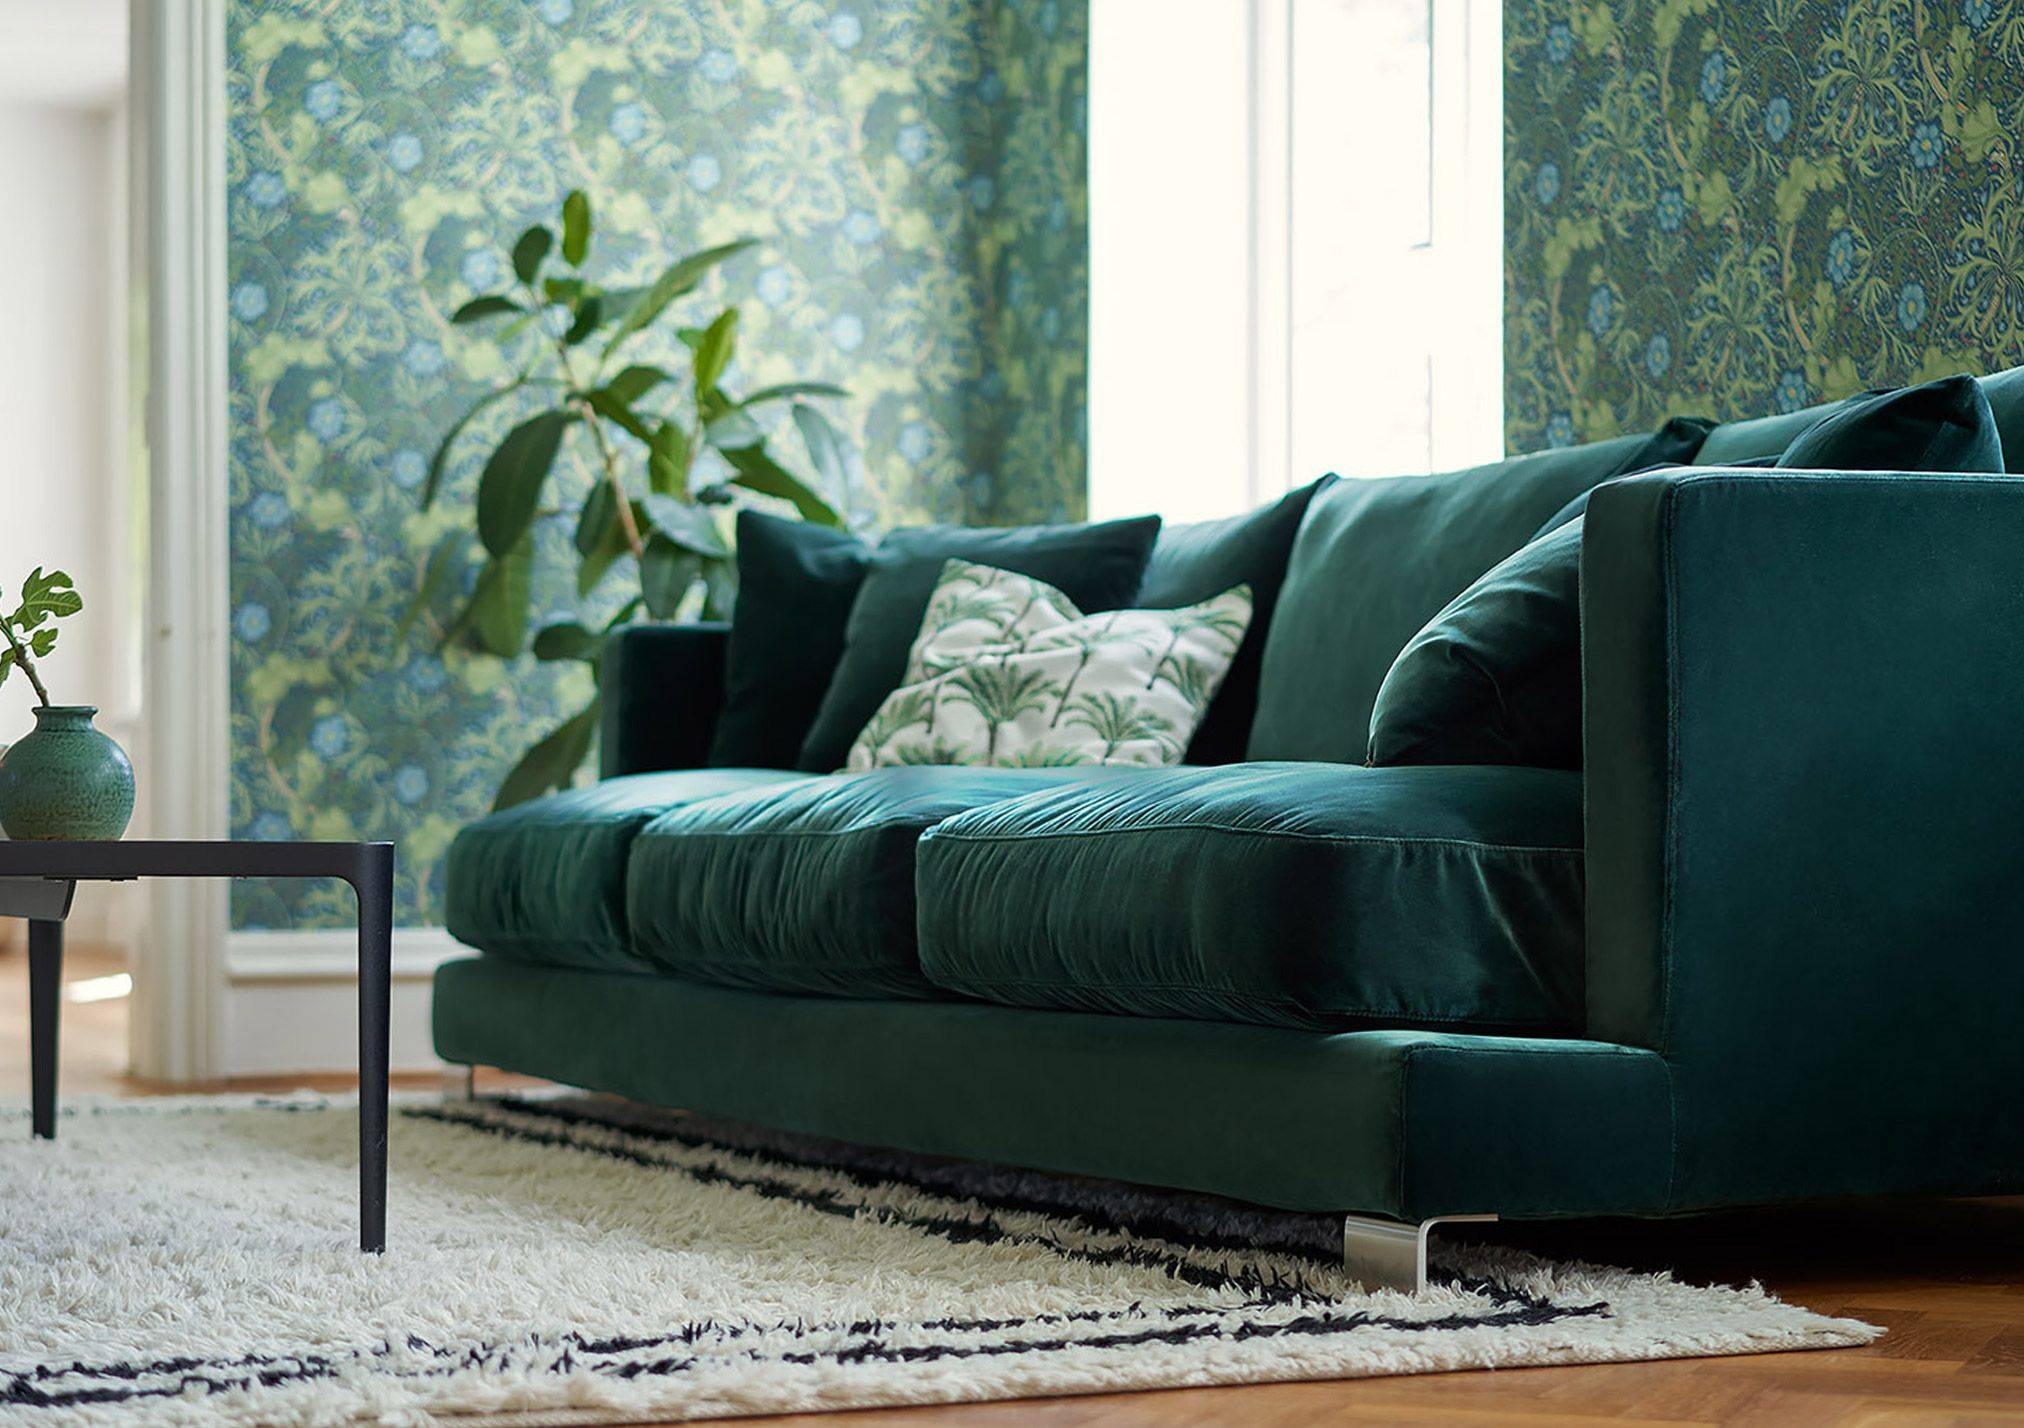 Kora Sofa Collection - Now Available Online At BF Home